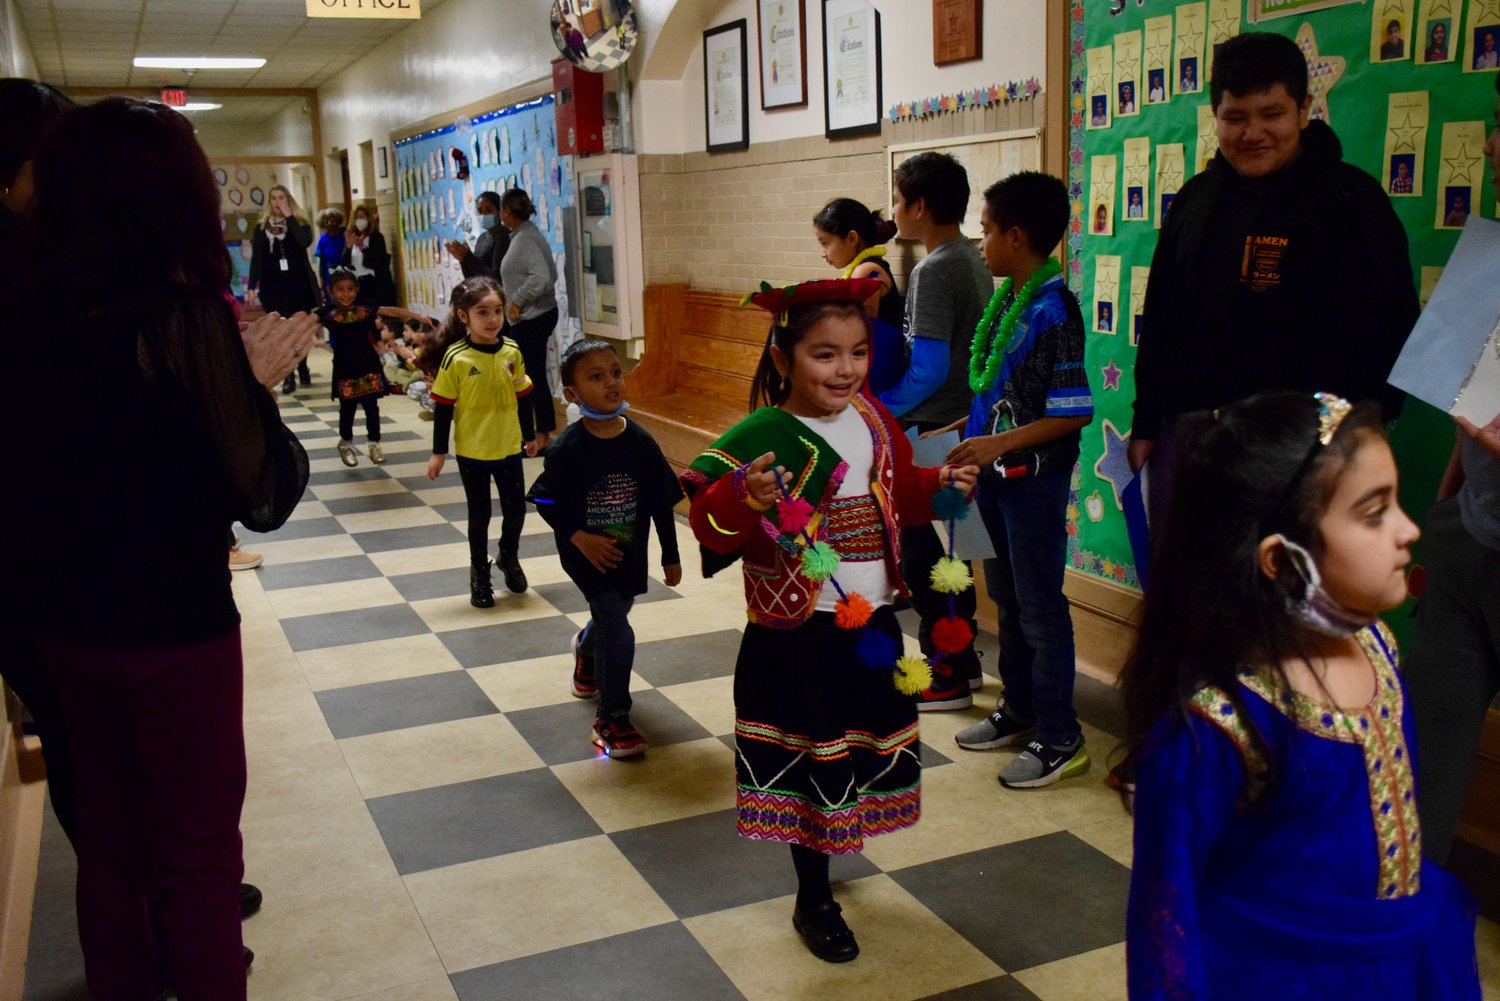 The young children marched down the hallways and received a round of applause for celebrating their cultures.